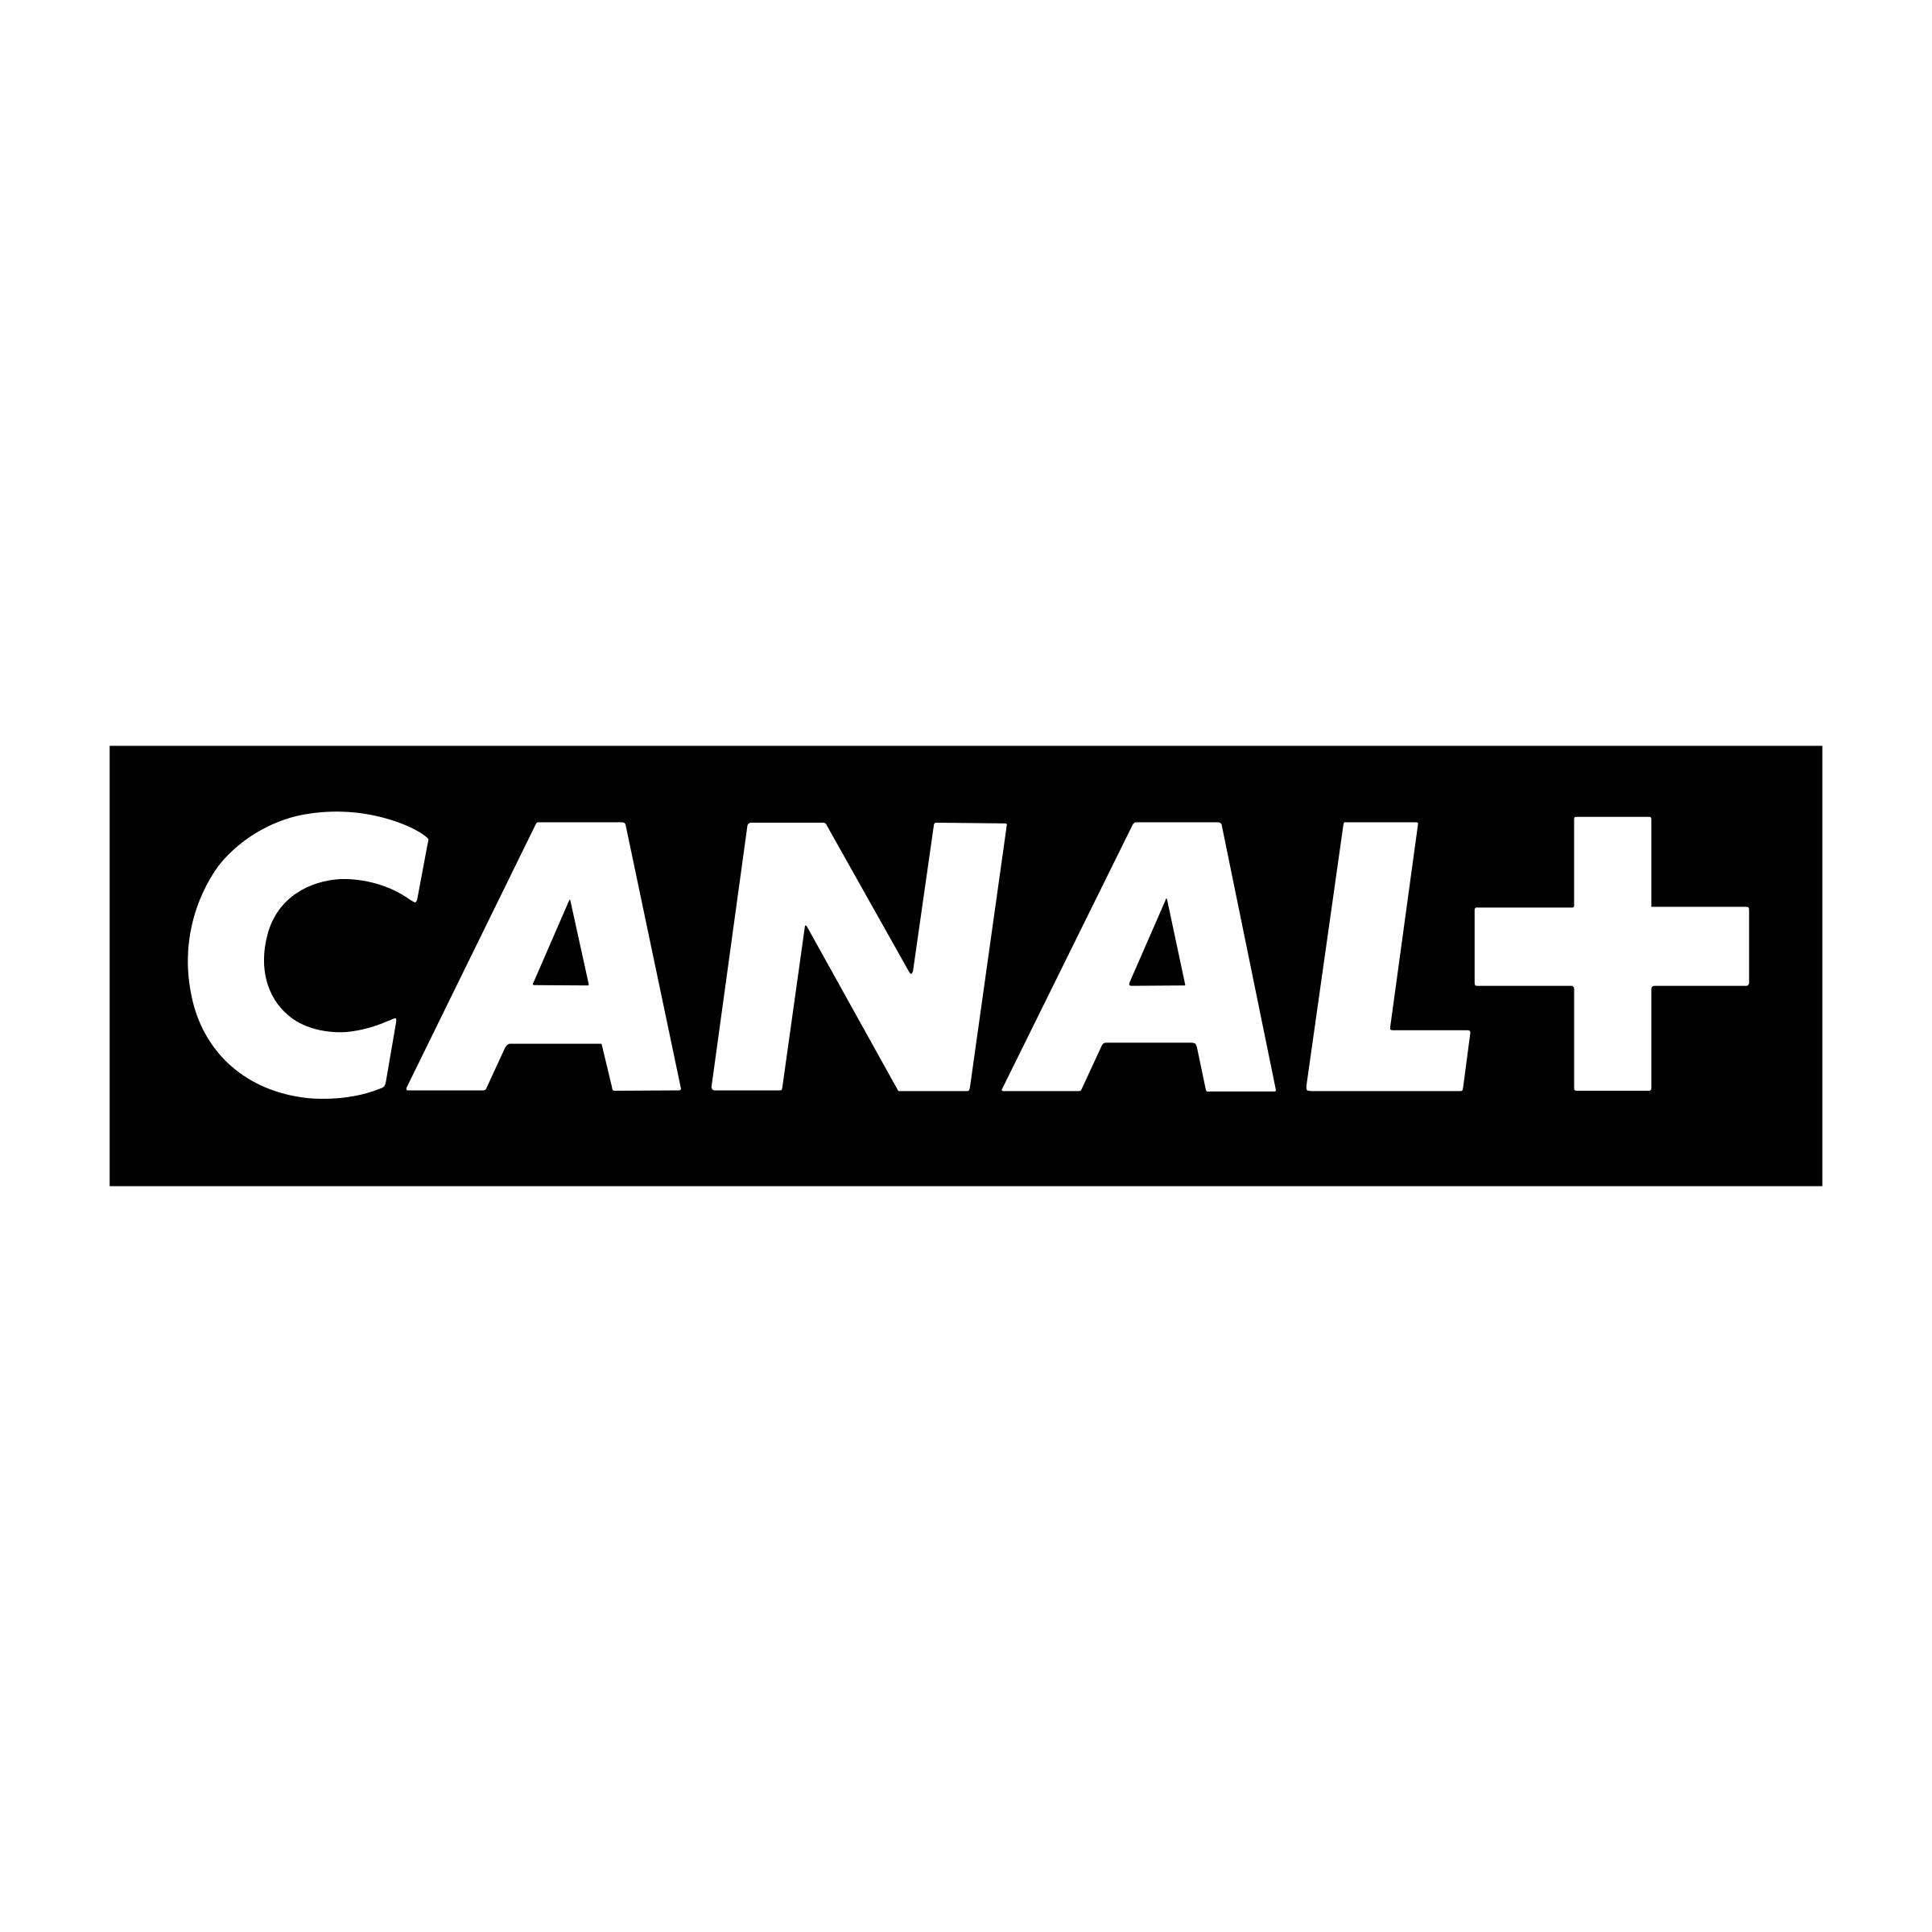 Canal++